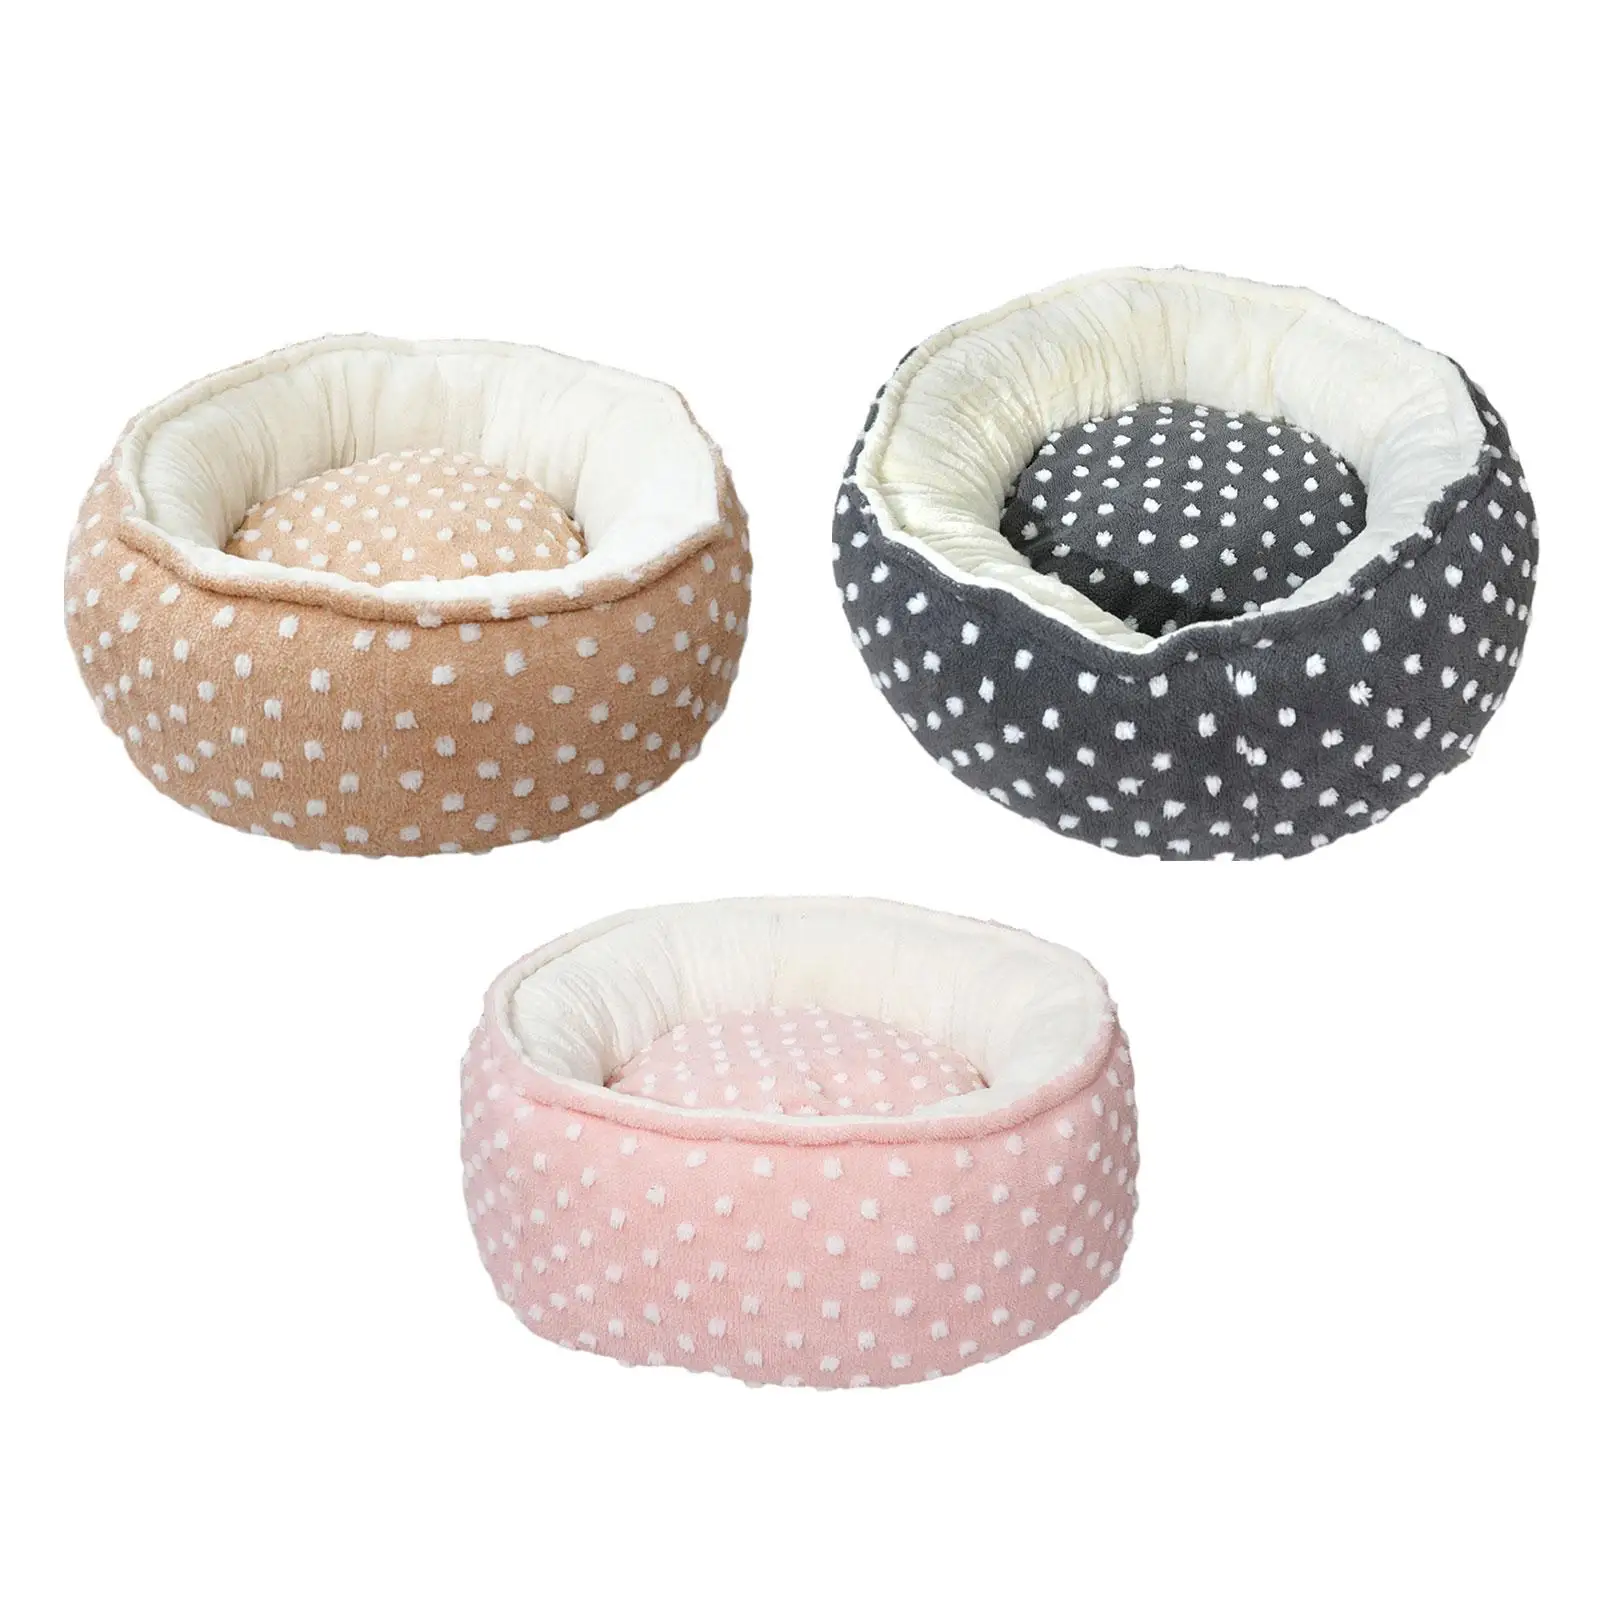 Dog Cat Bed Comfortable Self Warming Calming Autumn Winter Soft Plush Round Pet Bed Kennel Cat Nest for Dog Puppy Kitten Cats